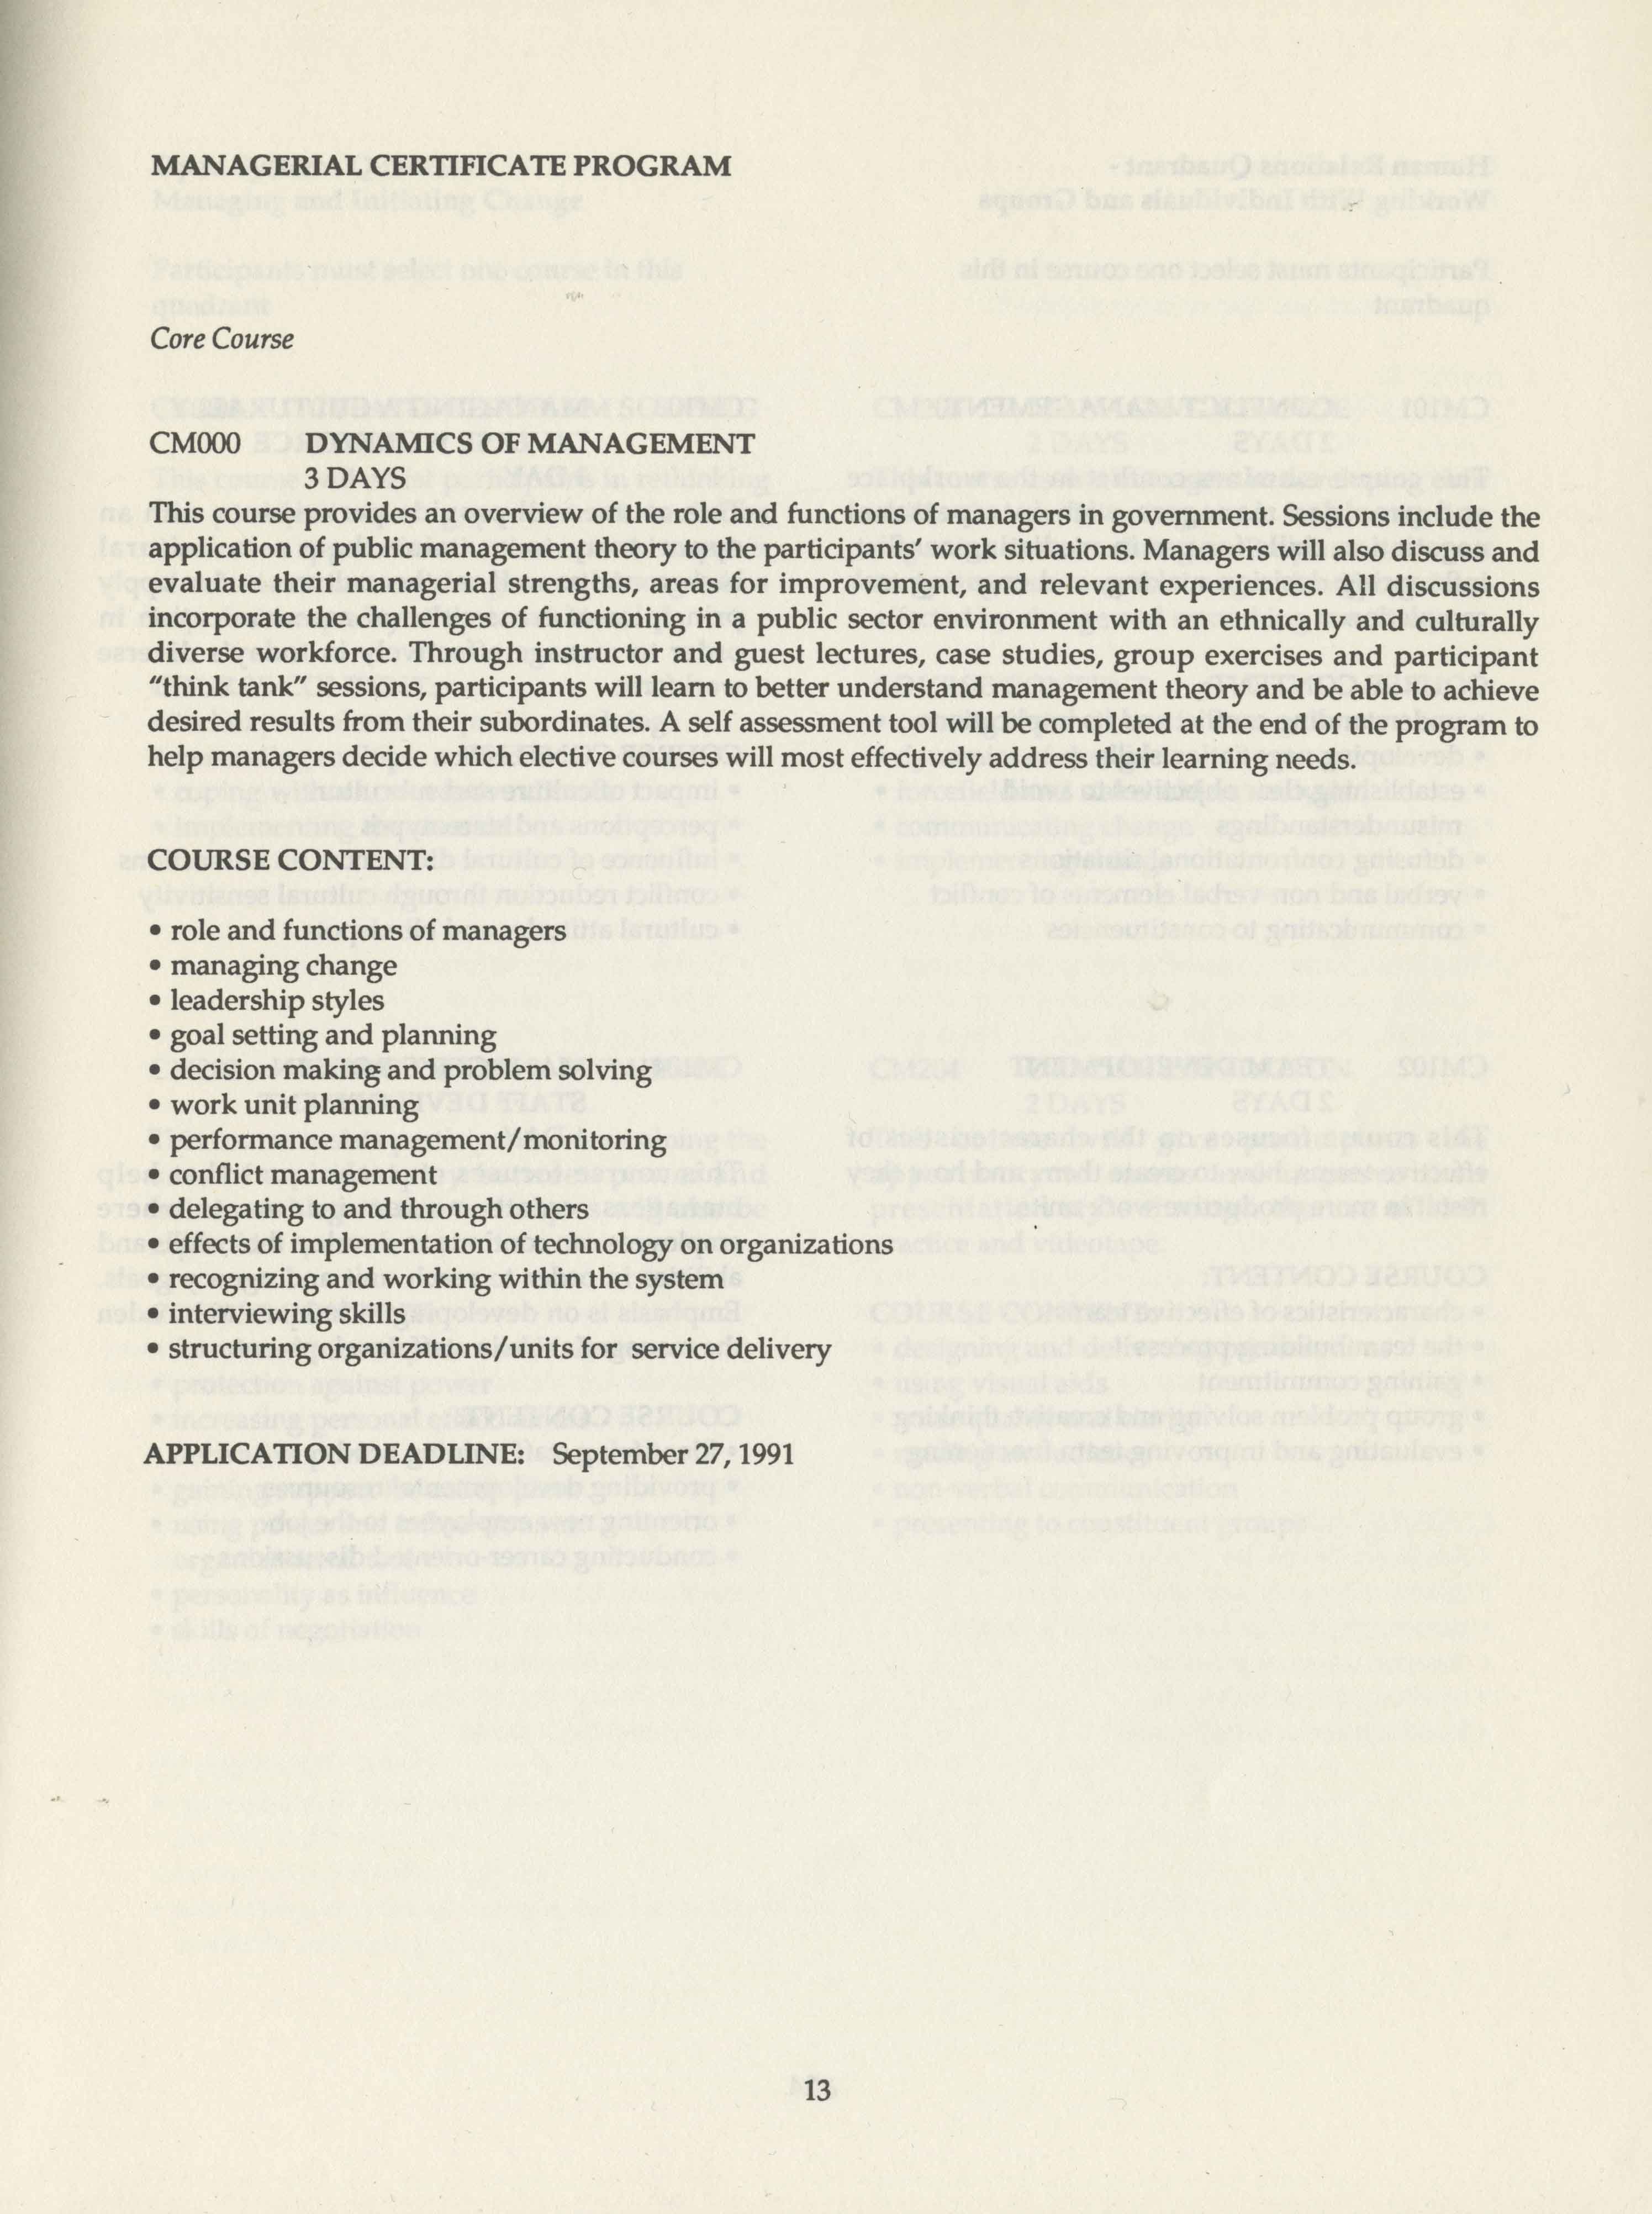 A page decribing the managerial certificate program